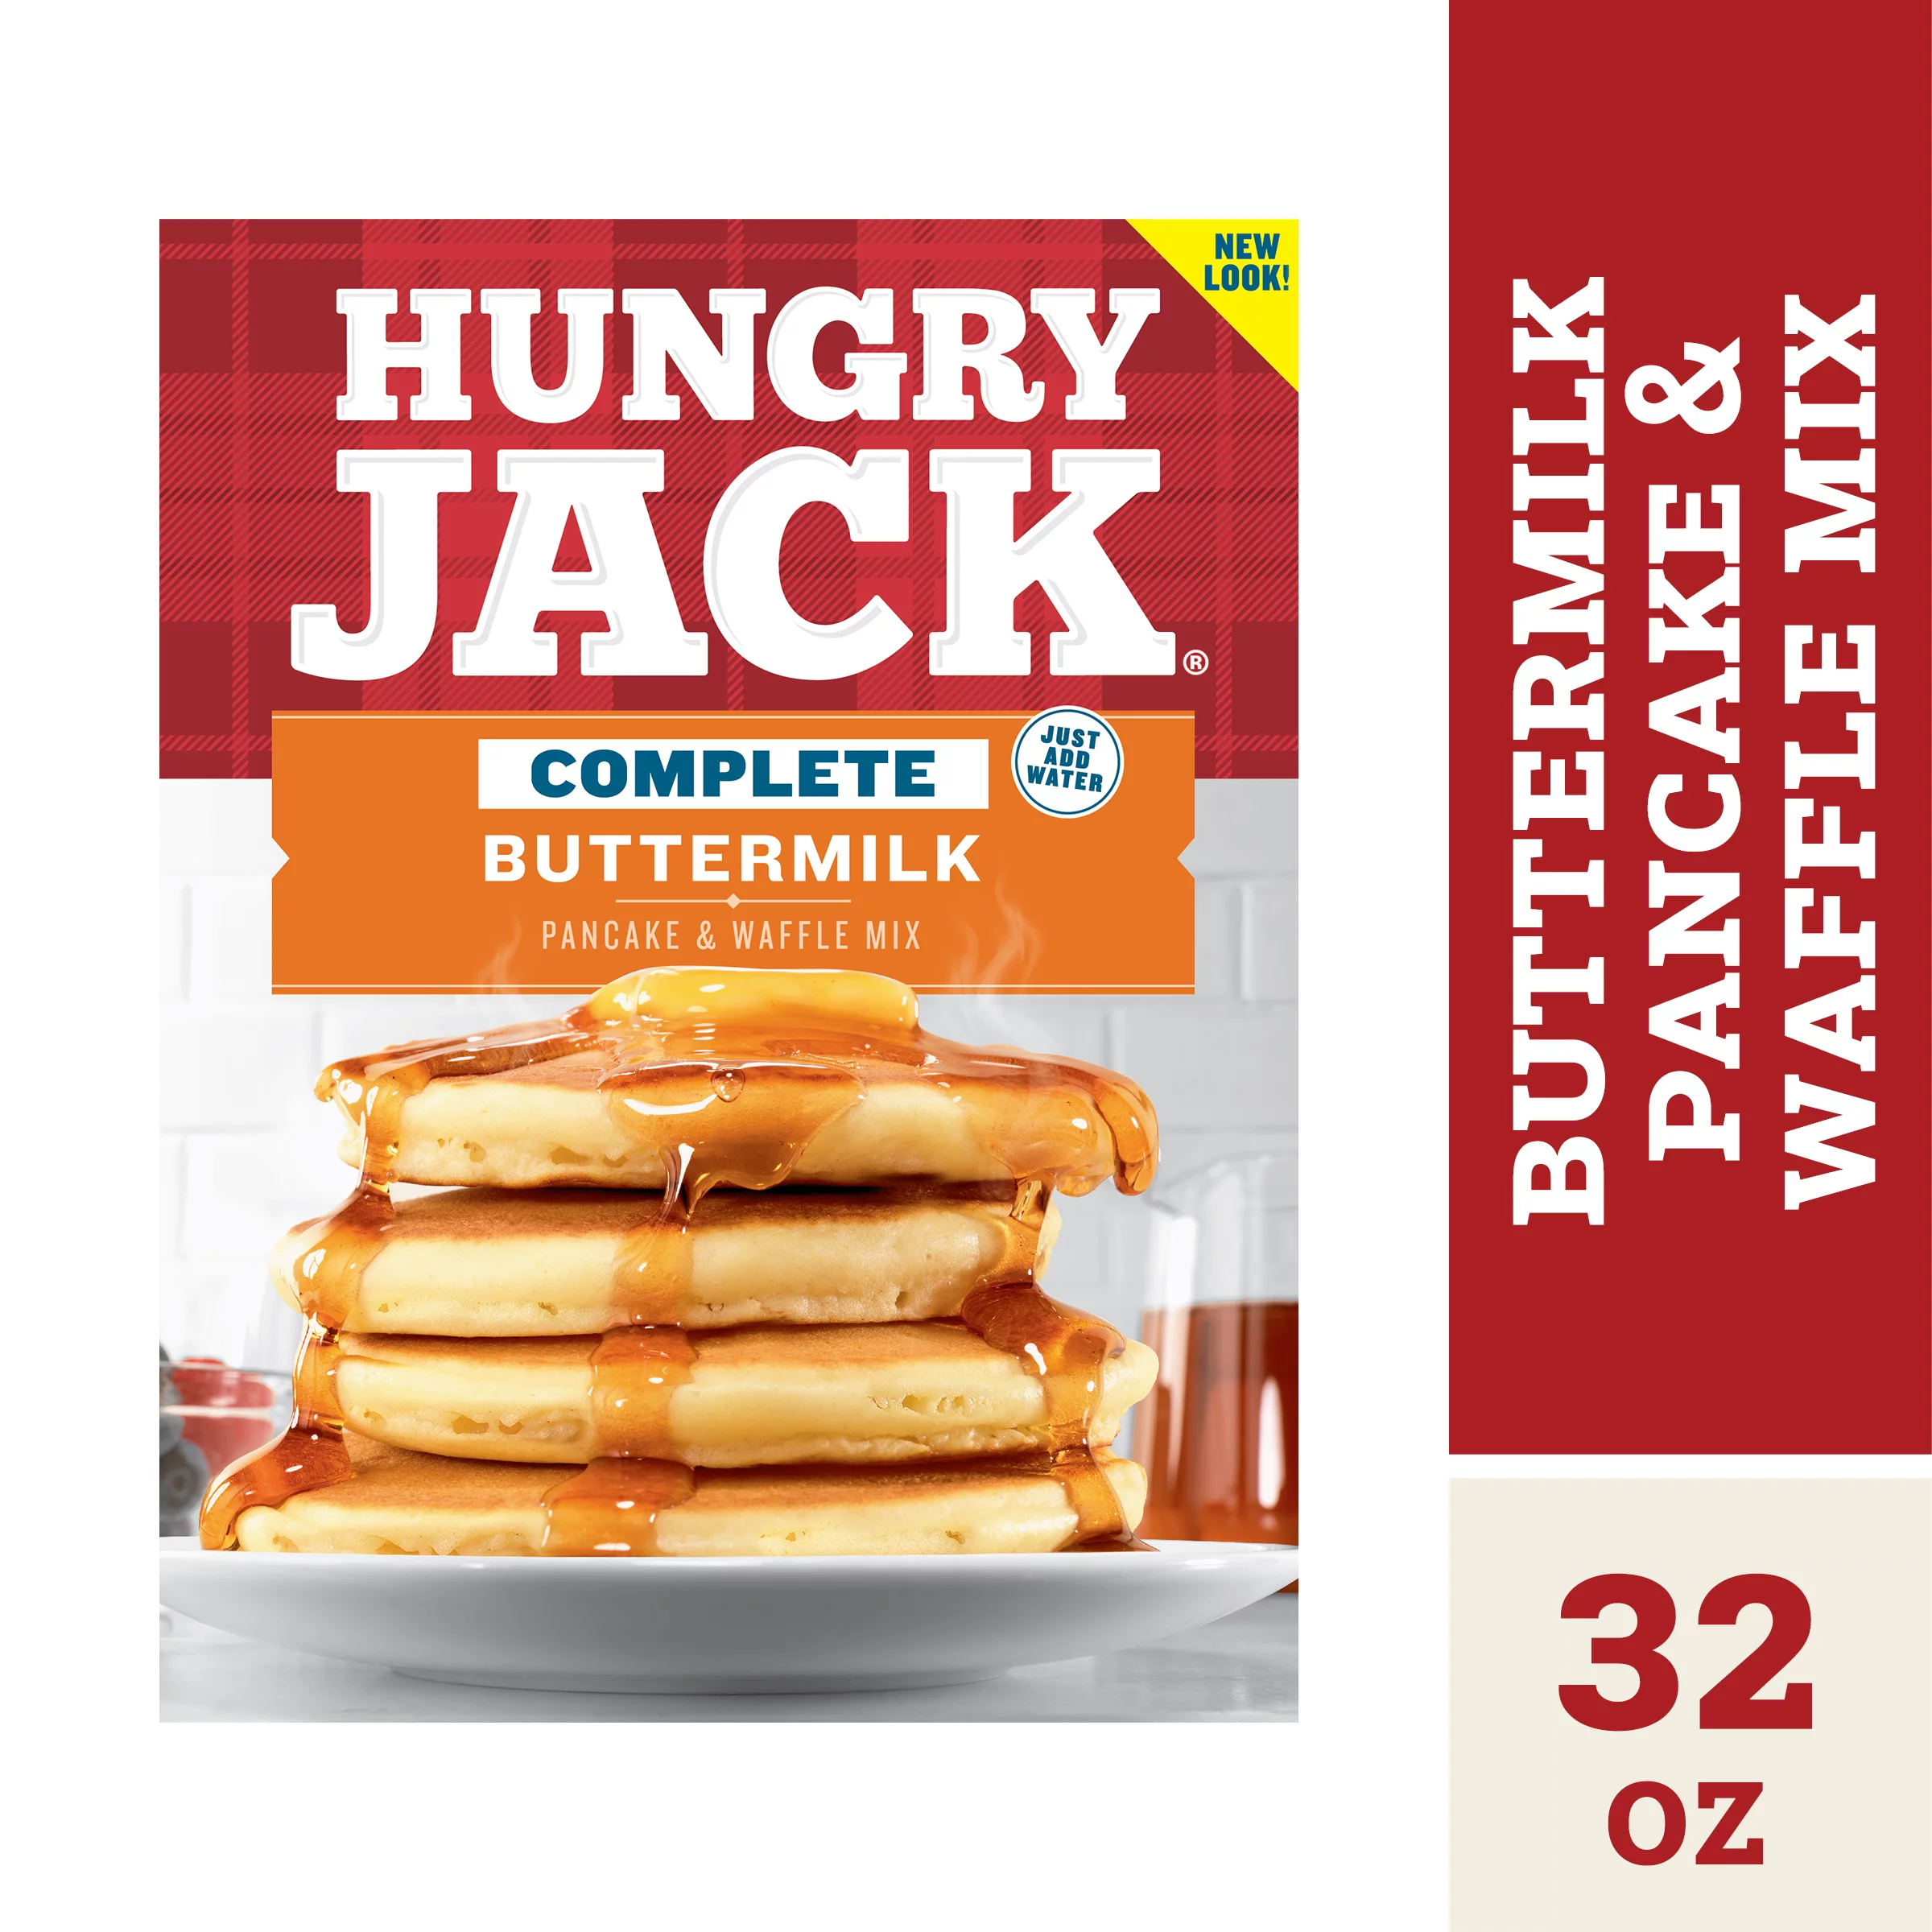 Hungry-Jack-Complete-Buttermilk-Pancake-Mix-and-Waffle-Mix